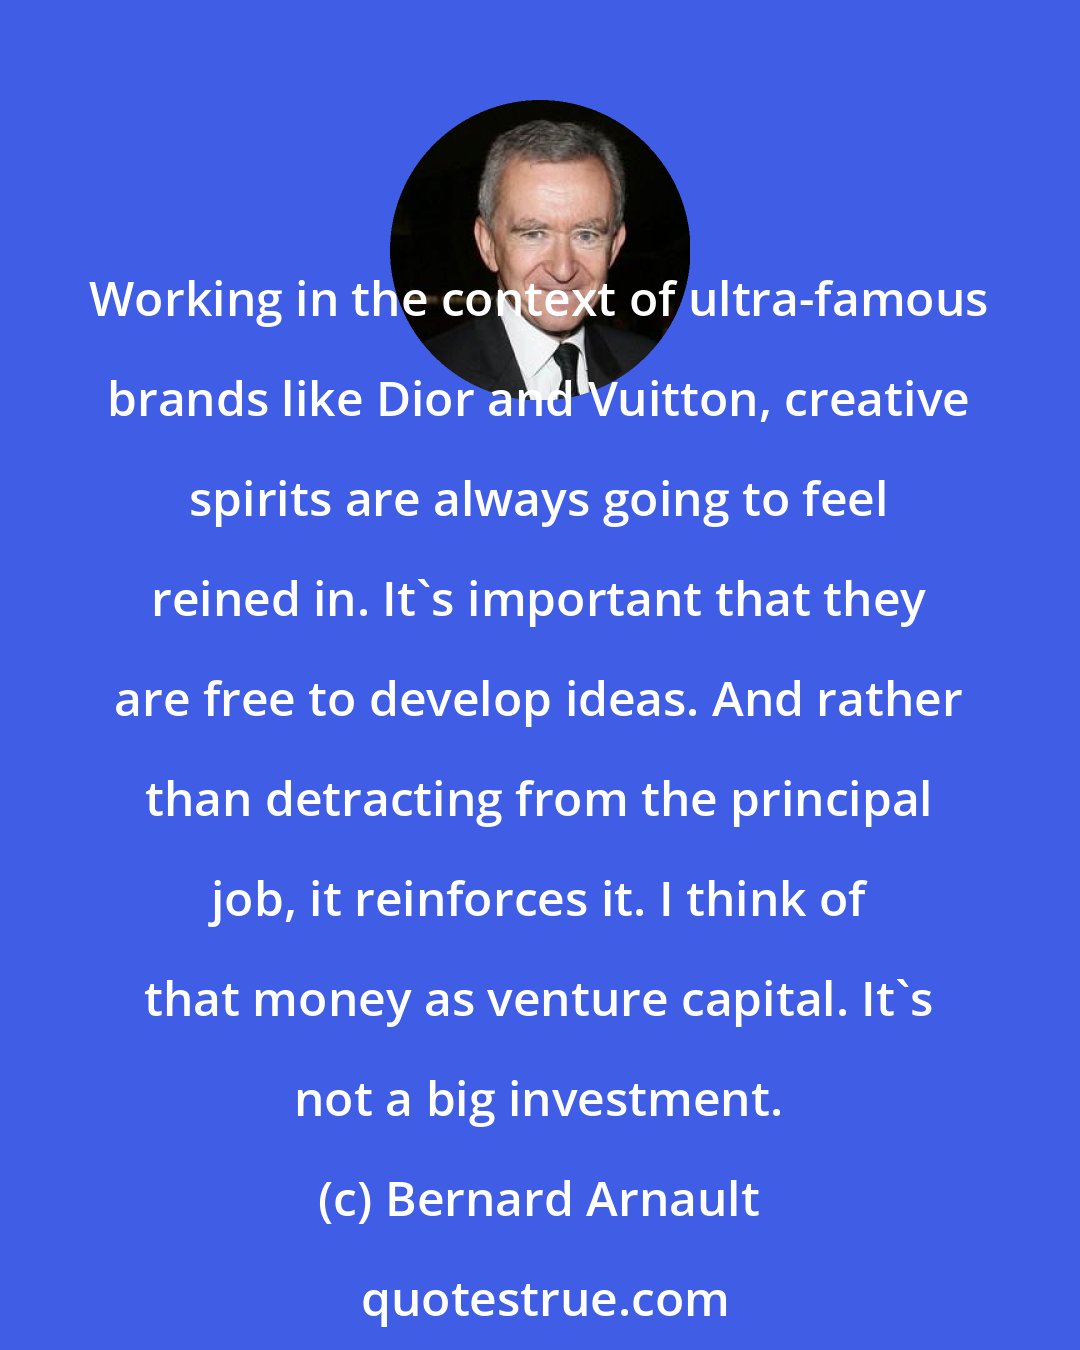 Bernard Arnault: Working in the context of ultra-famous brands like Dior and Vuitton, creative spirits are always going to feel reined in. It's important that they are free to develop ideas. And rather than detracting from the principal job, it reinforces it. I think of that money as venture capital. It's not a big investment.